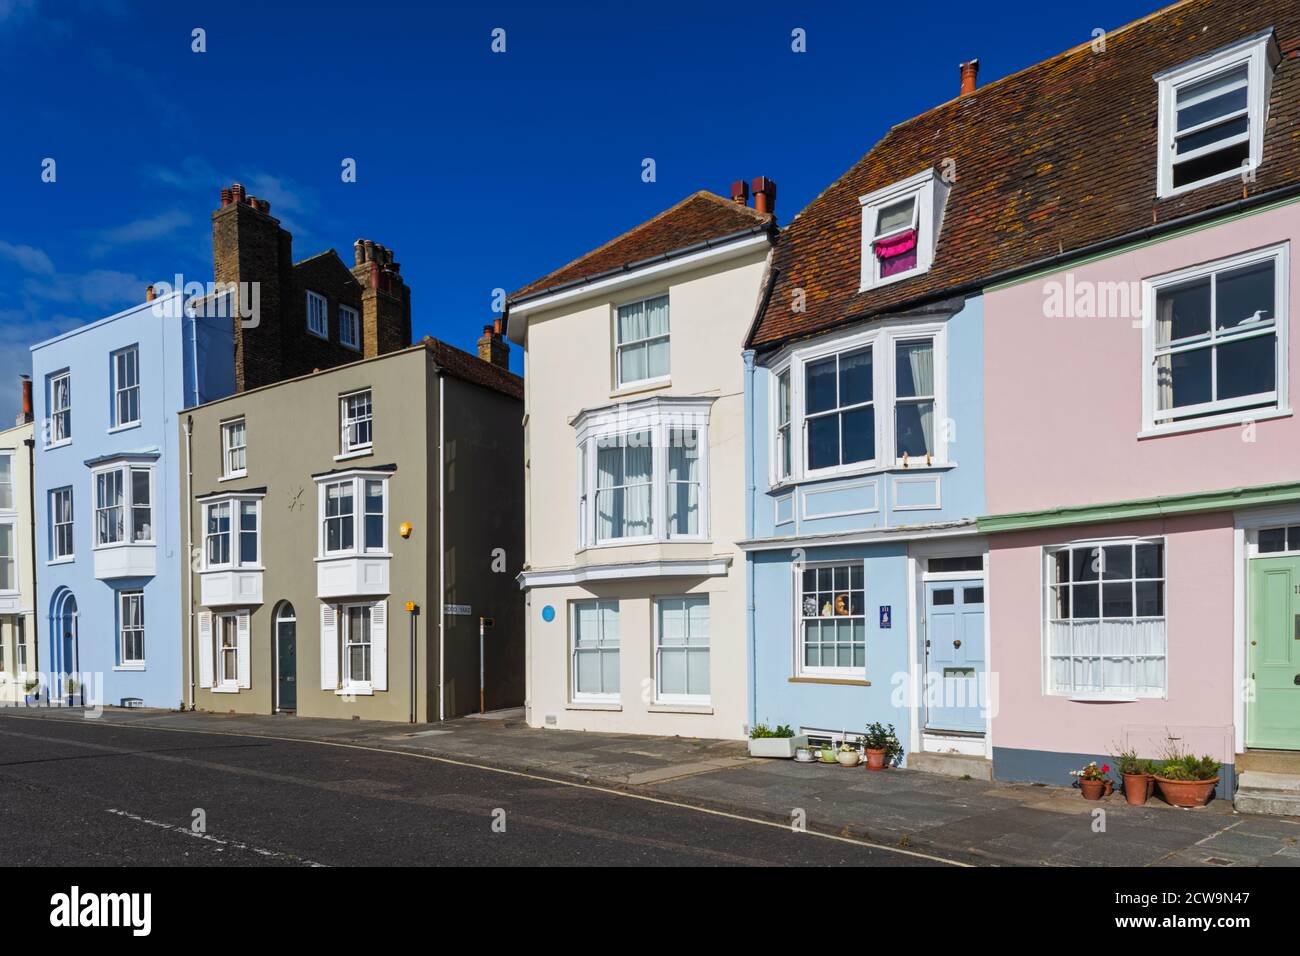 England, Kent, Deal, Residential Street Scene with Colourful Housing Stock Photo